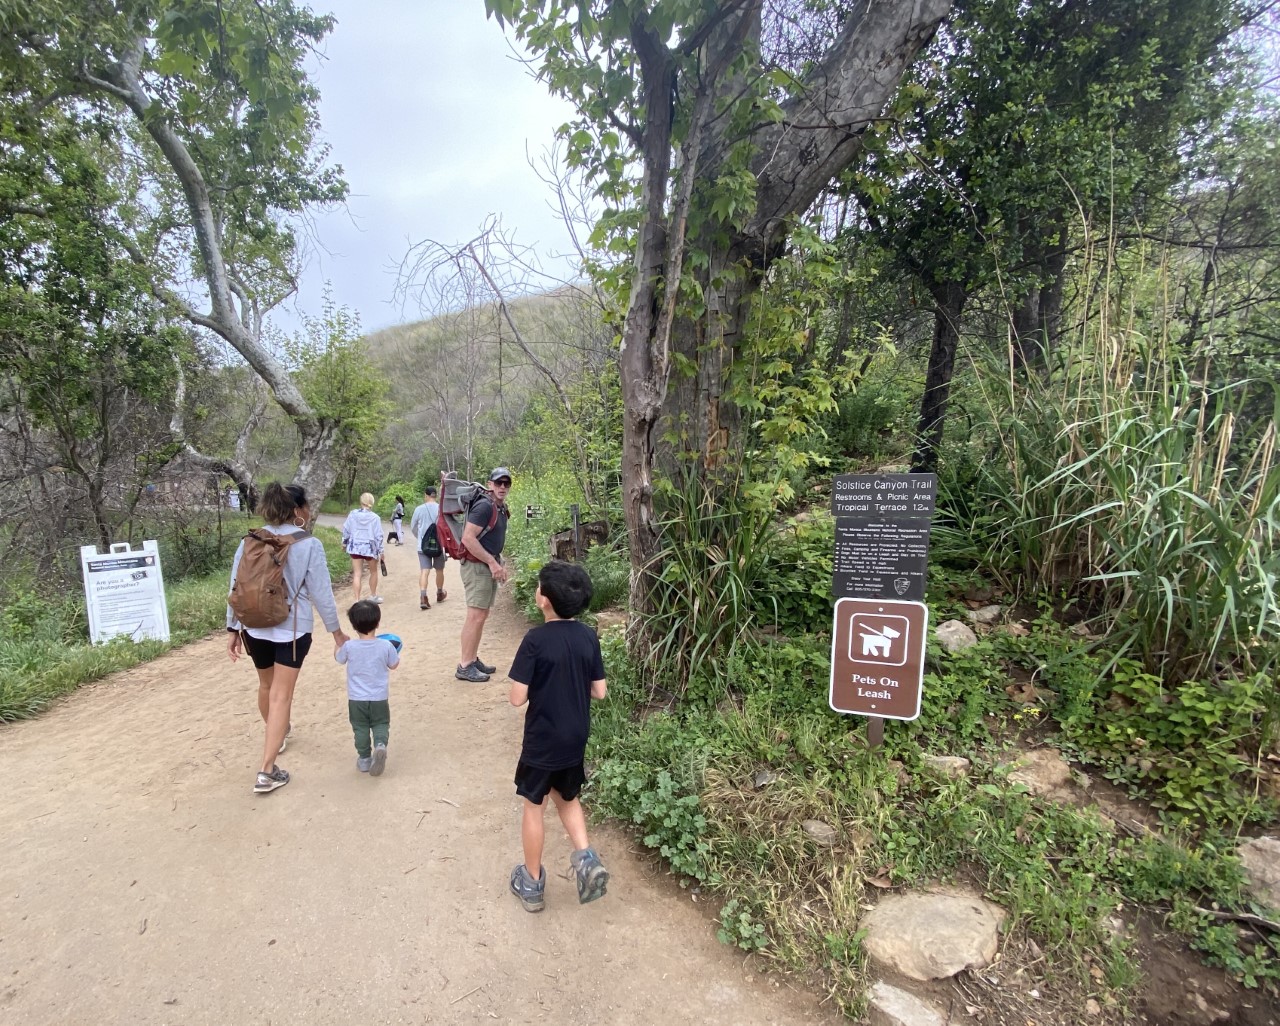 Solstice Canyon closed